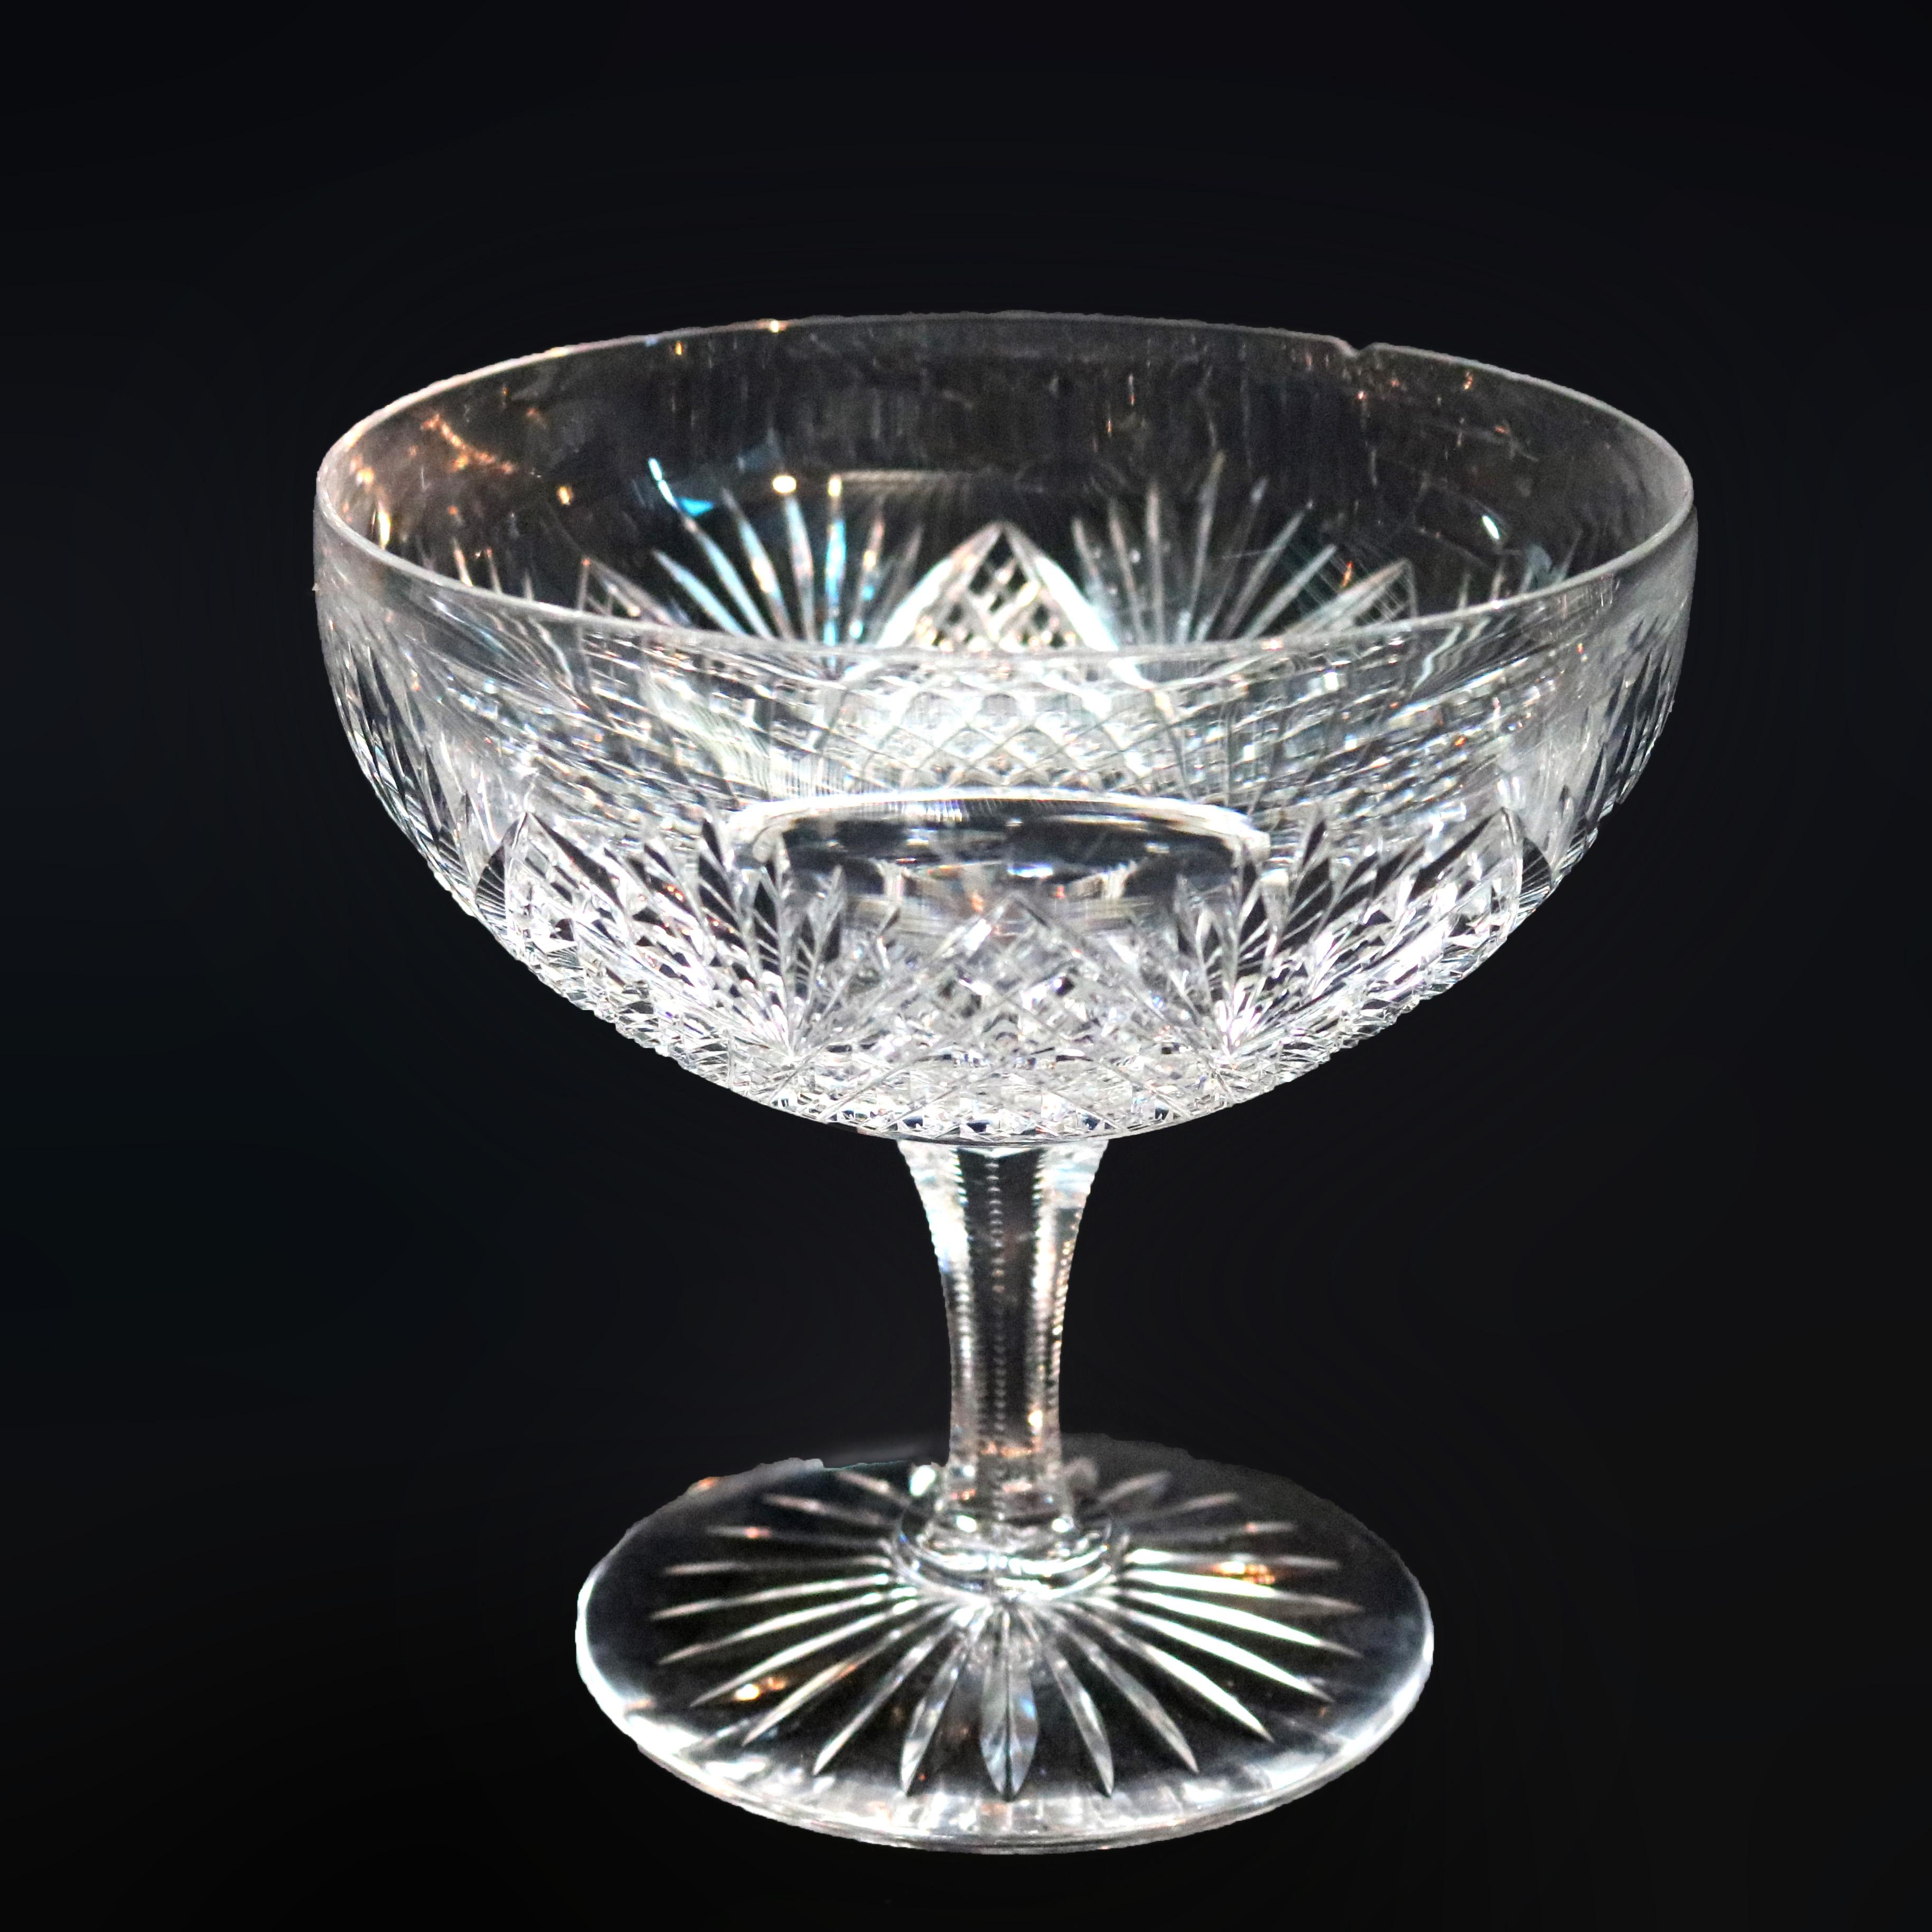 An antique pair of American brilliant cut glass dessert compotes by Hawkes, clover shaped acid etched maker mark on base as photographed, 20th century

Measures: 4.75